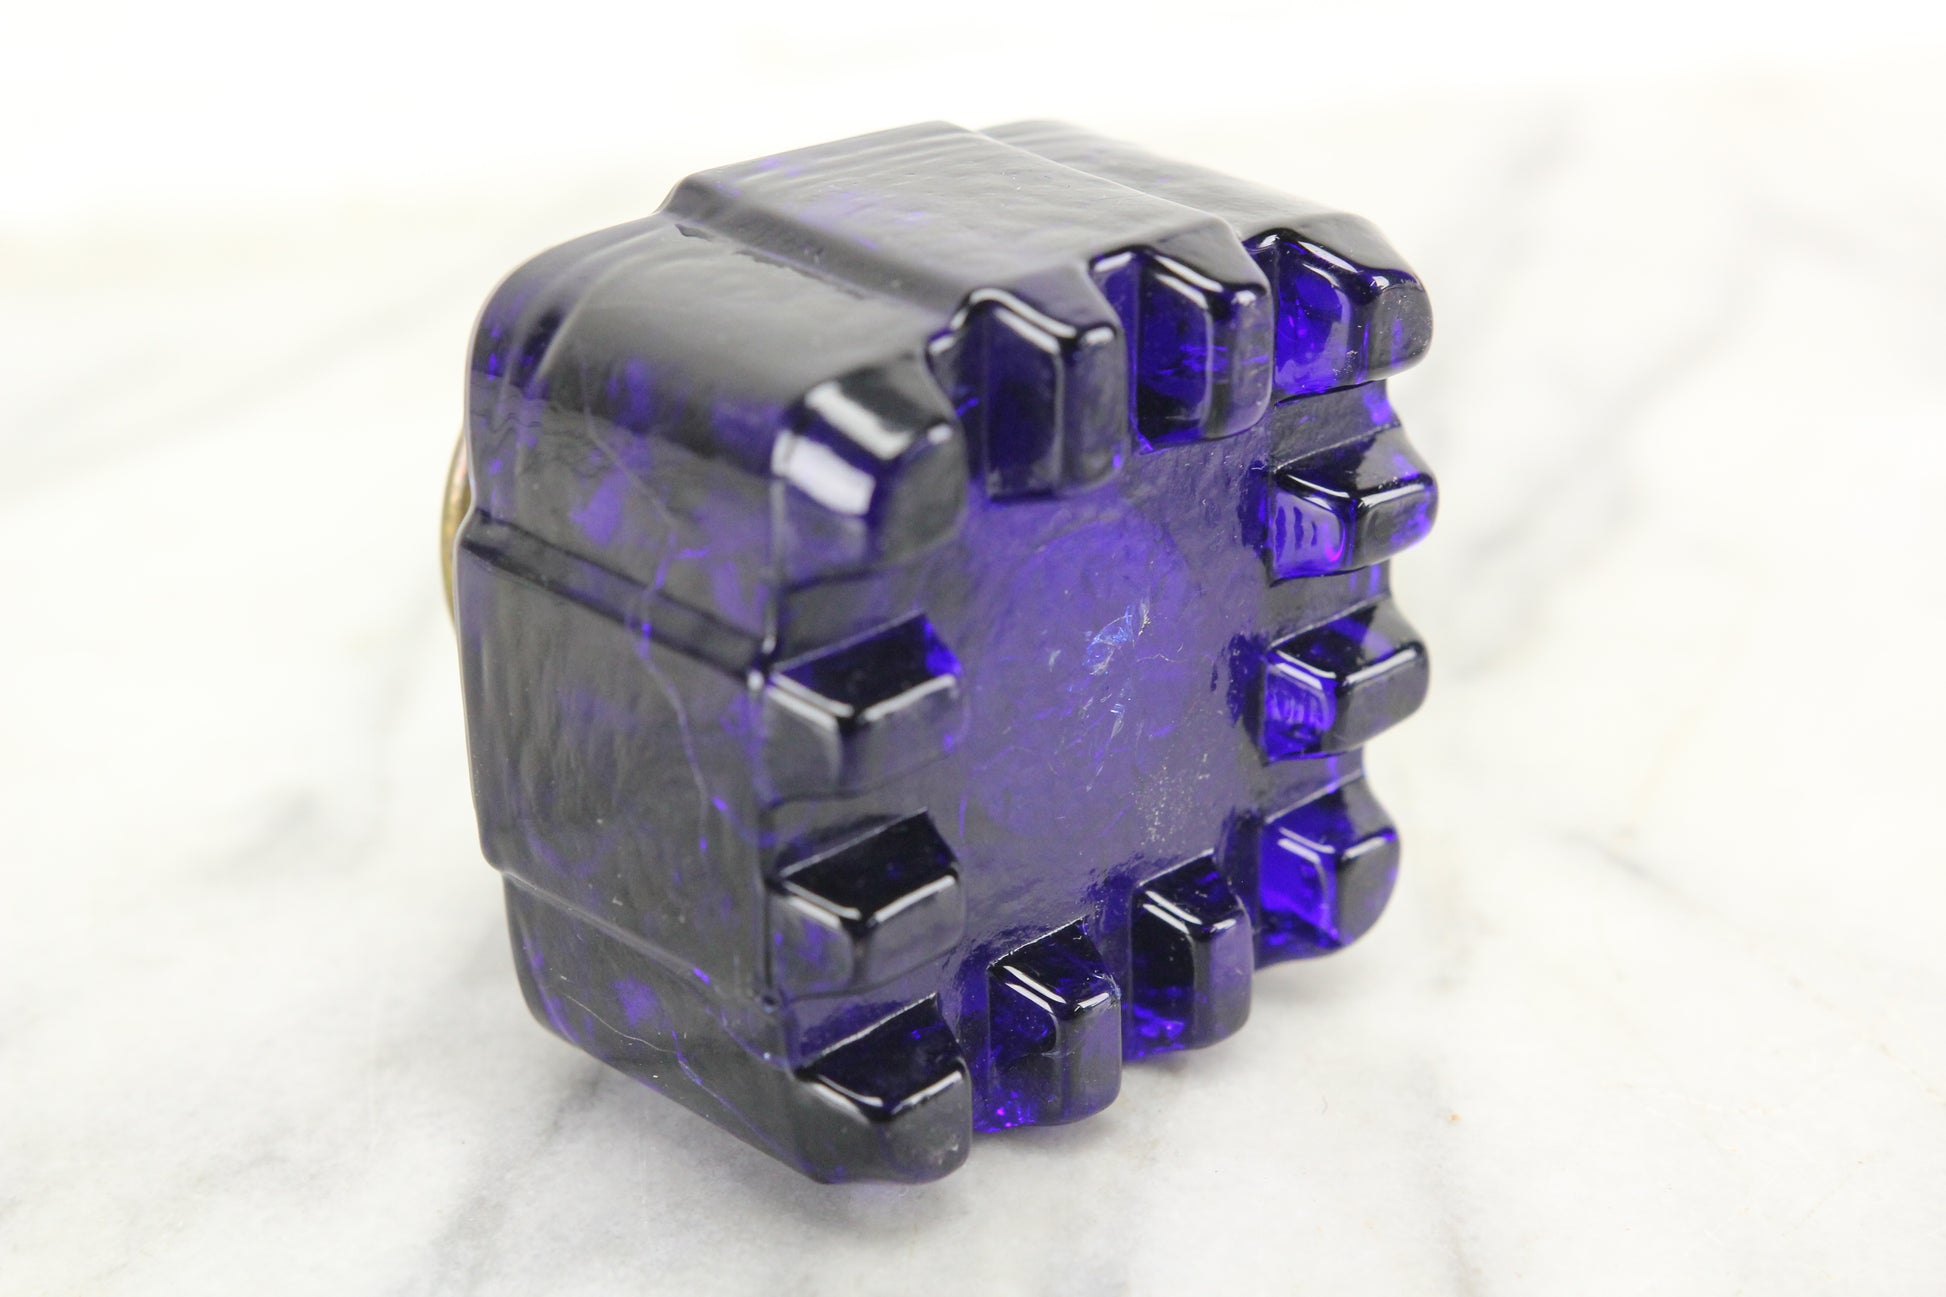 Antique Style Solid Thick Glass Square Cobalt Blue Inkwell Ink pot Bot –  Early Home Decor